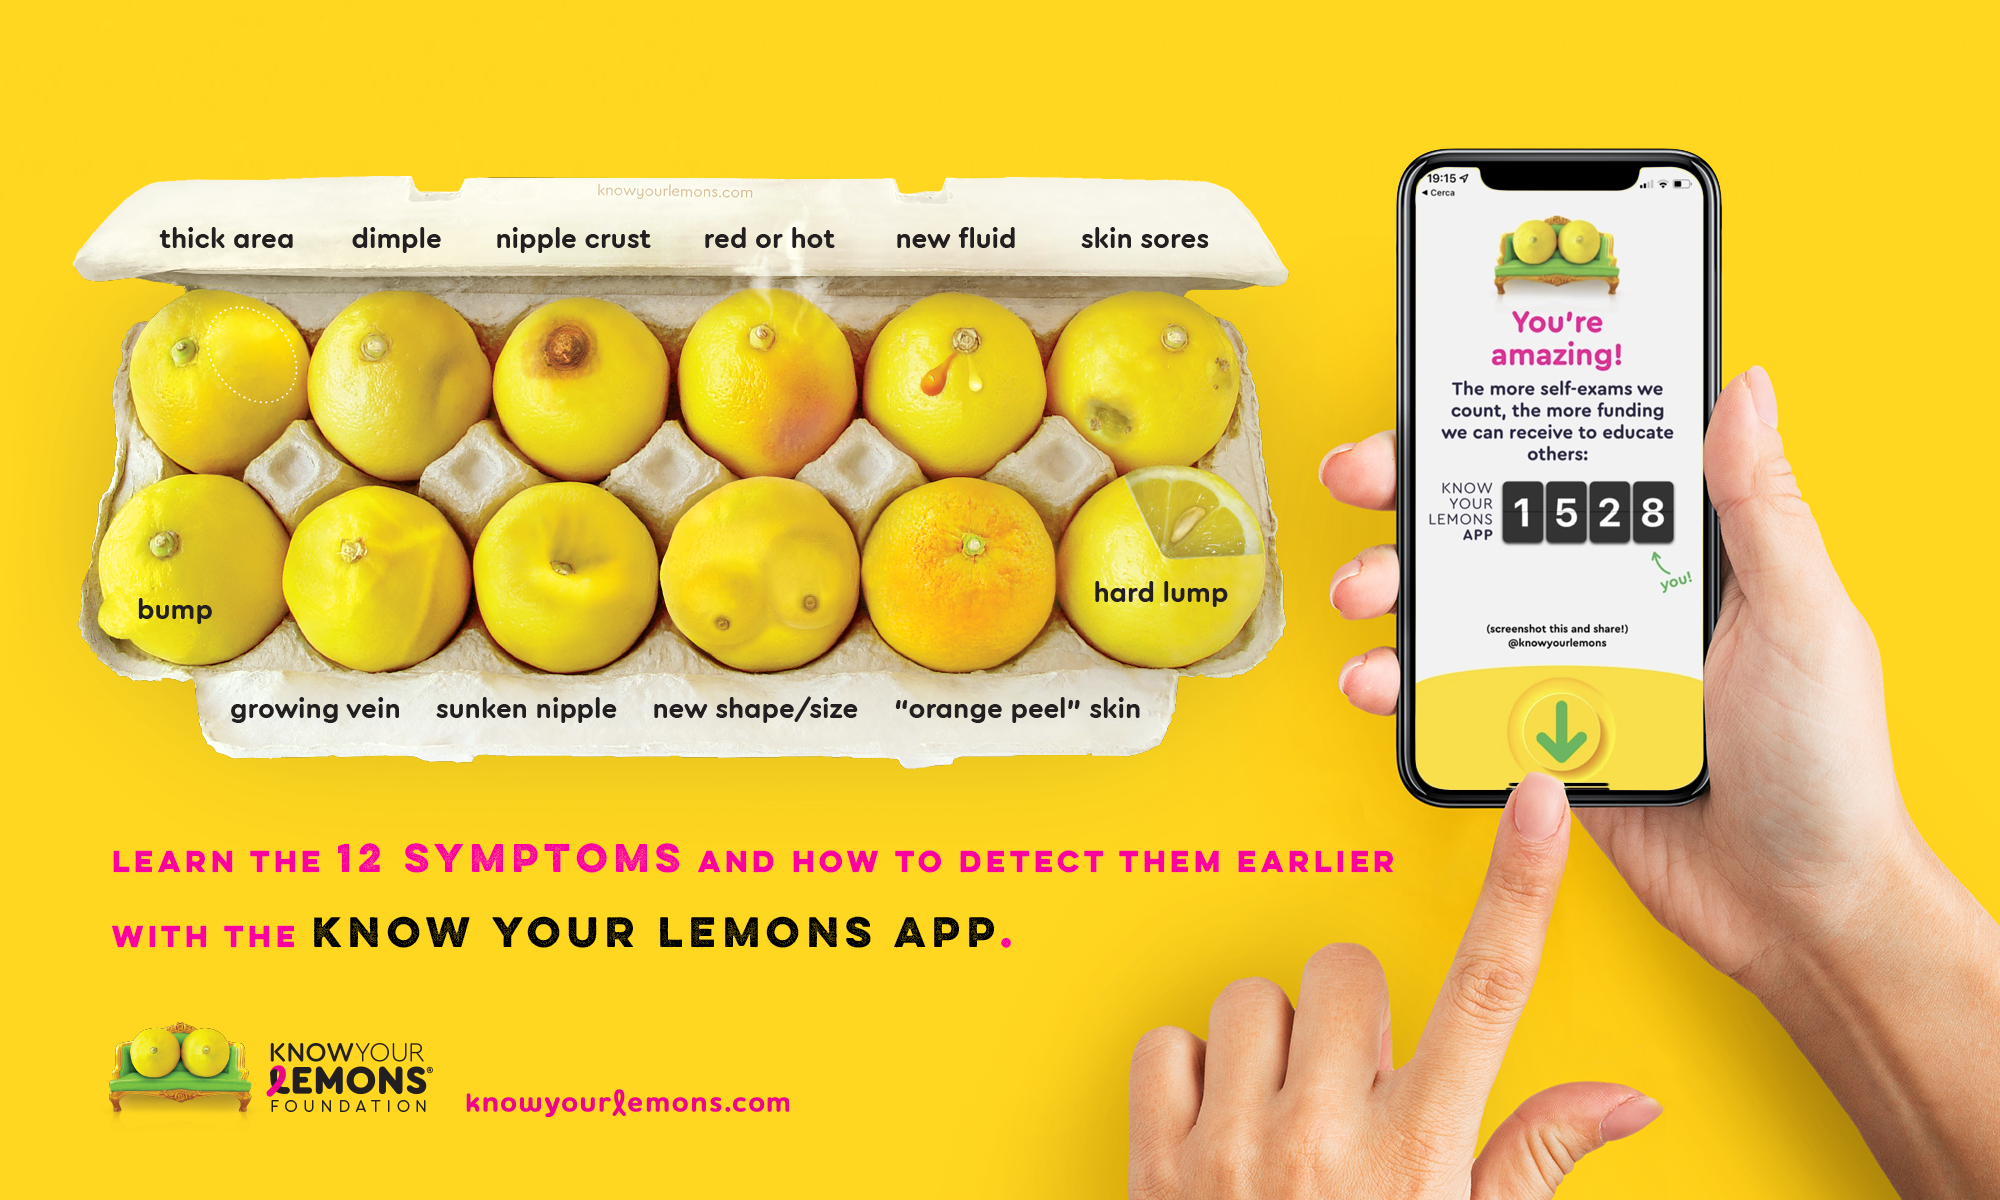 In this edition of the Founder series, Corrine Beaumont, founder of Know Your Lemons, shares how she changed breast cancer prevention for millions.